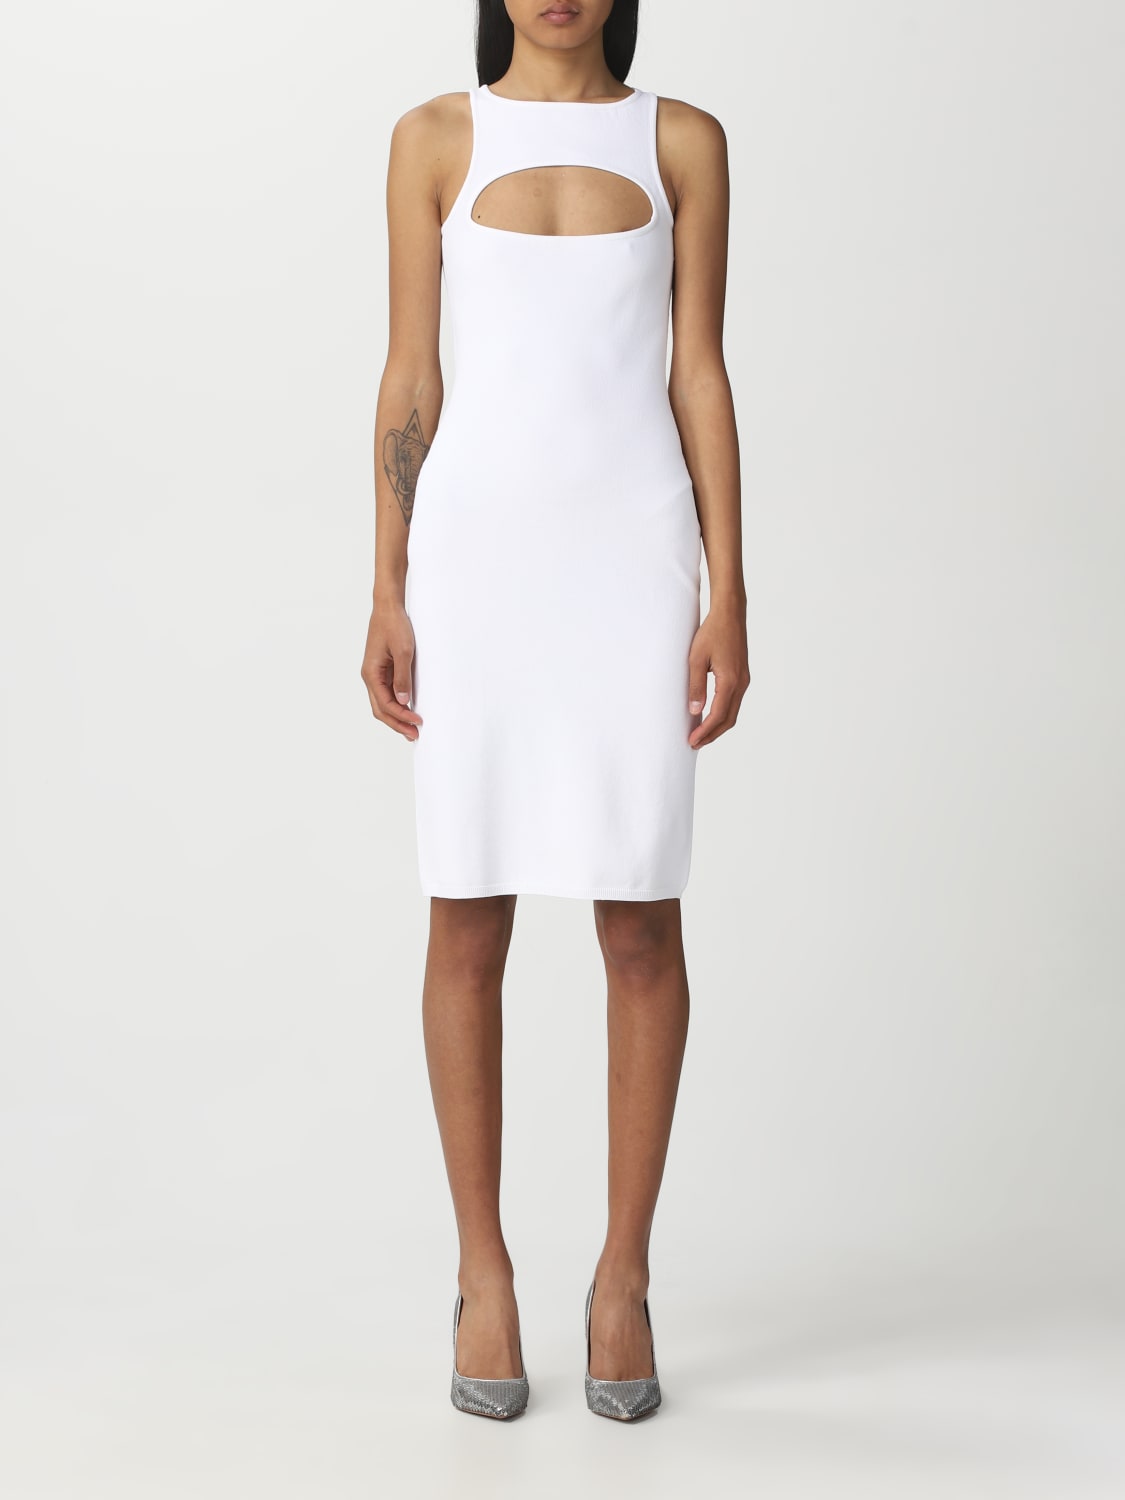 Dsquared2 Outlet: dress in viscose blend - White | Dsquared2 dress